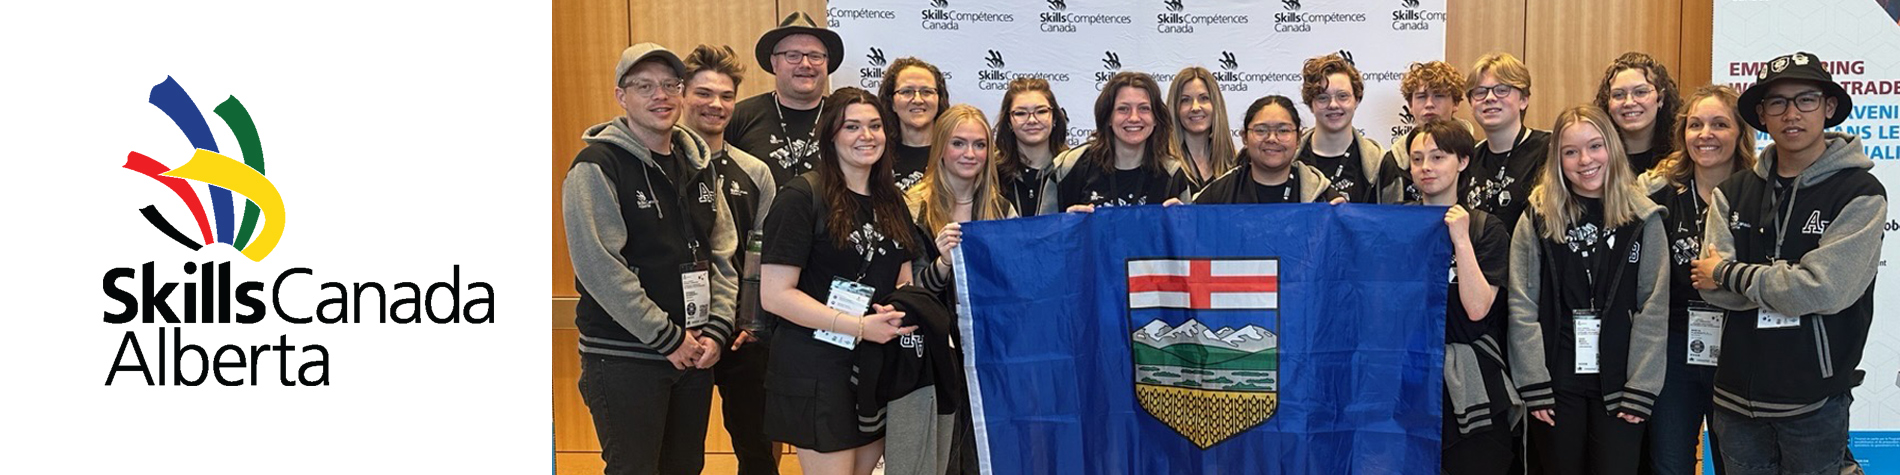 <p class="slider-title">CBE Students Win 40 Medals at Provincial and National Skills Competitions</p><div class="banner-line"></div><p class="slider-subtitle">High School students demonstrated exceptional talent and skills at trade and technology competitions</p> <a style="pointer-events:all" class=AEBannerMoreLink href="https://www.cbe.ab.ca/news-centre/Pages/cbe-students-win-40-medals-at-provincial-and-national-skills-competitions.aspx">Read More</a>